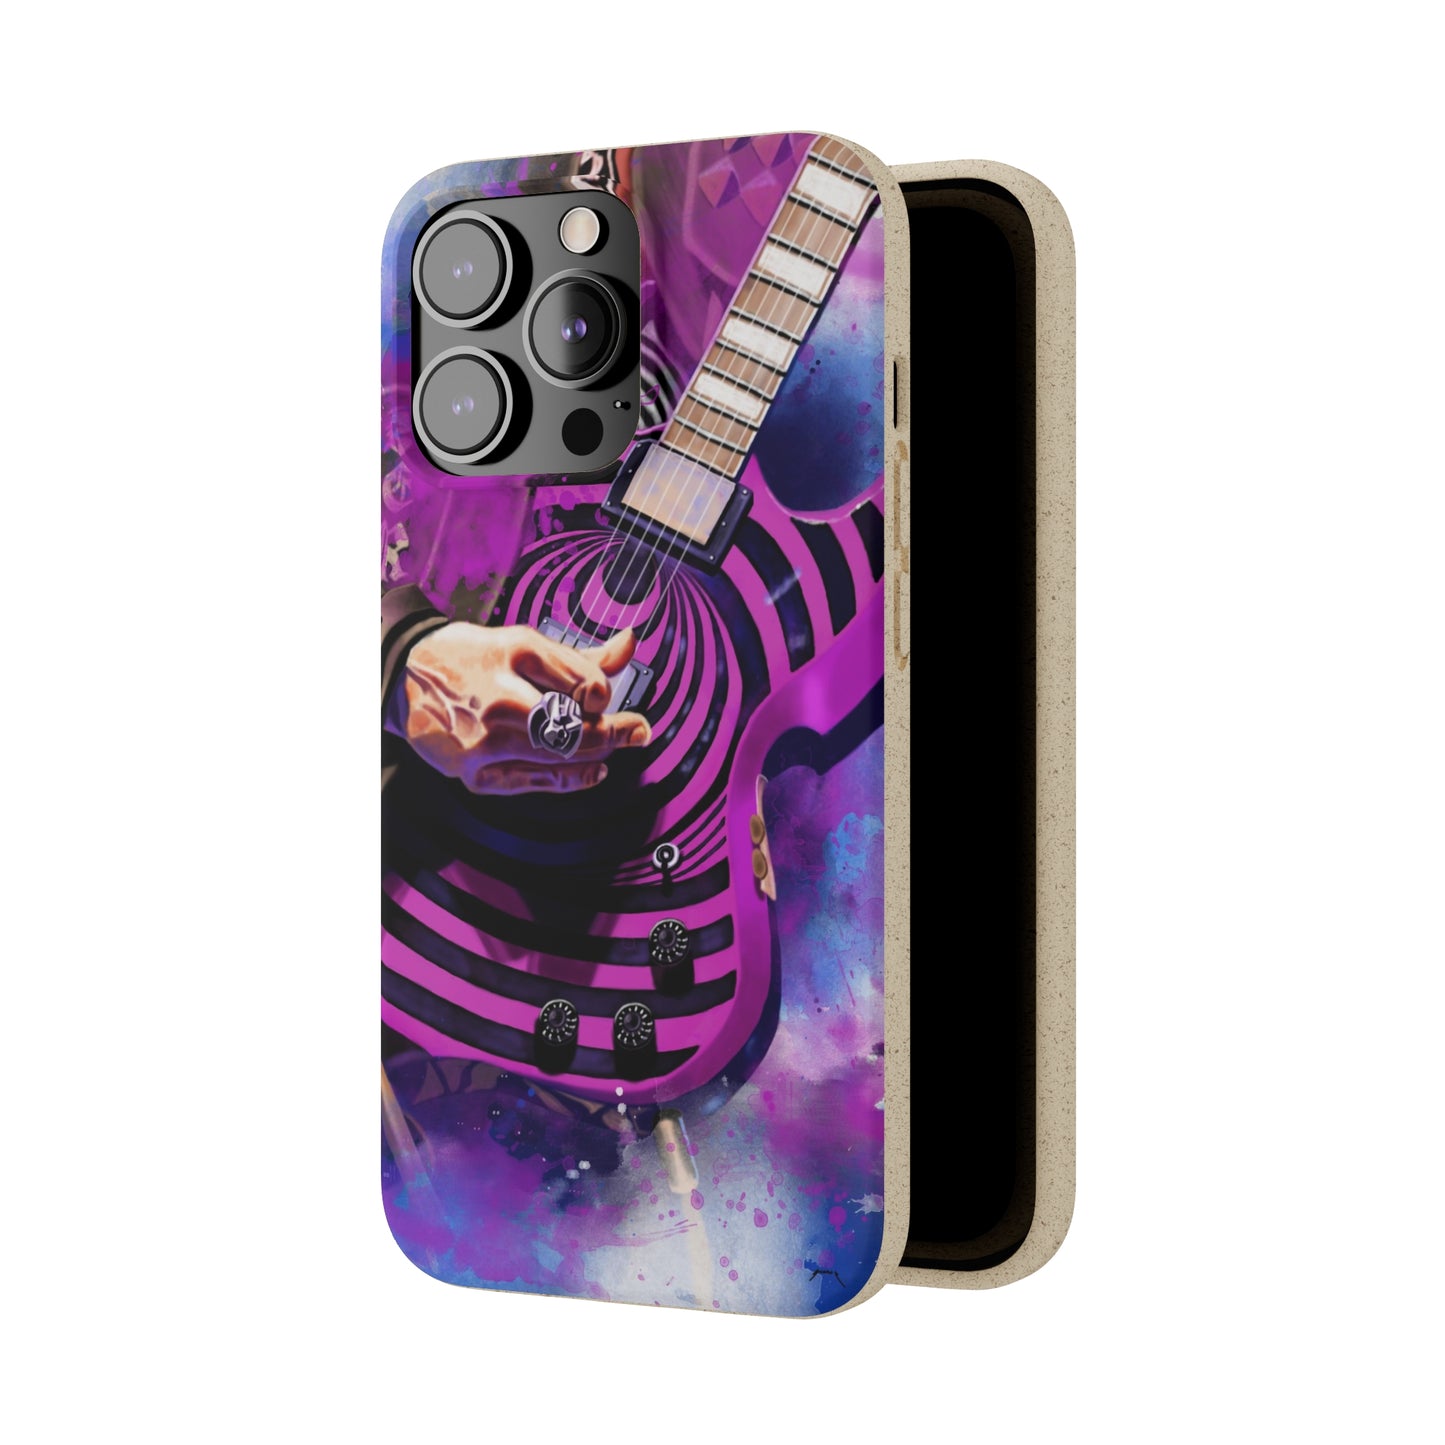 Digital painting of a purple black electric guitar with hand printed on a biodegradable iphone phone case